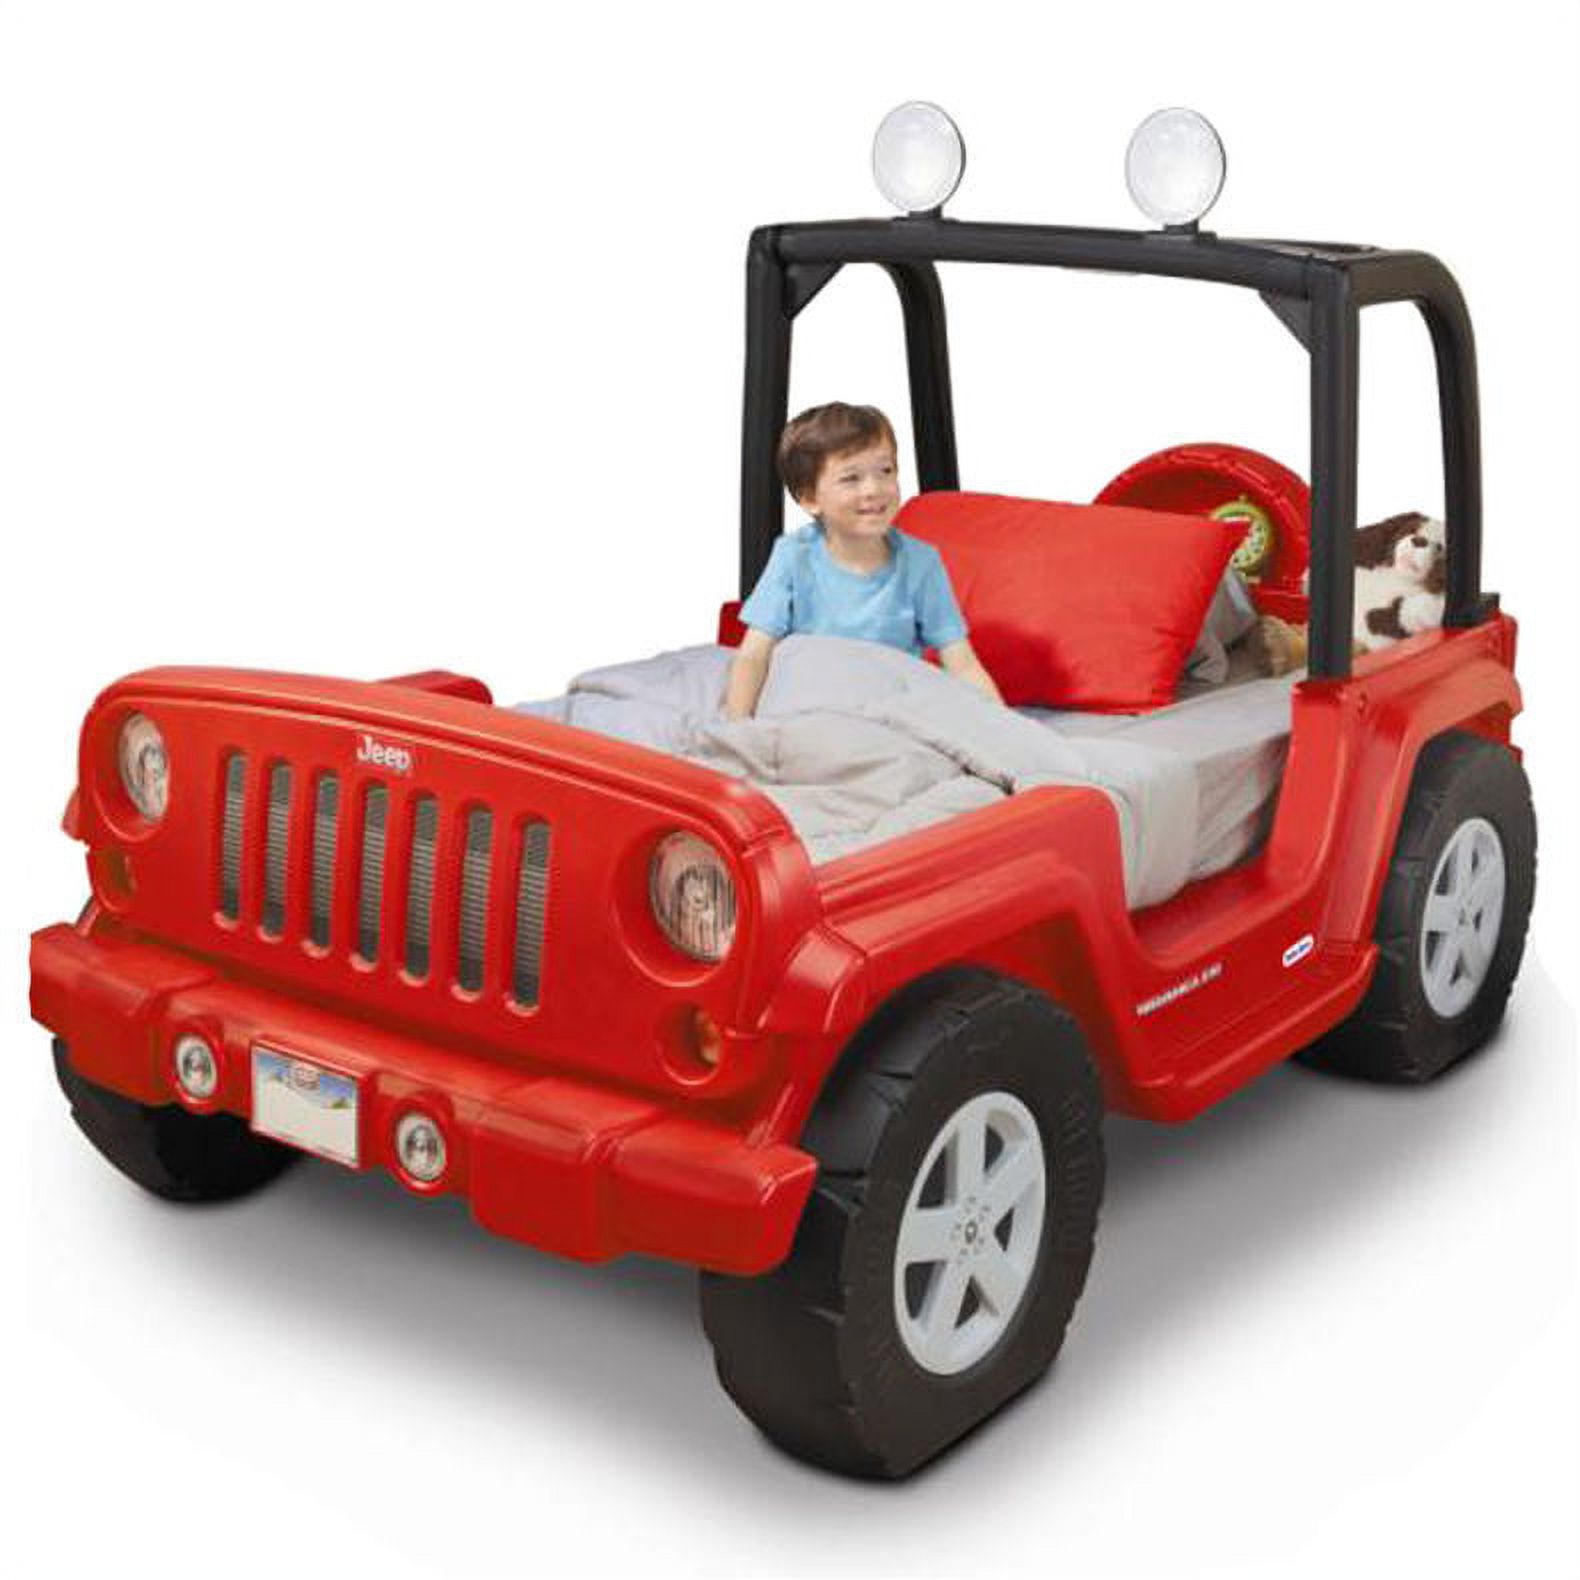 Little Tikes Jeep Wrangler Toddler-to-Twin Convertible Bed, Red - image 3 of 8